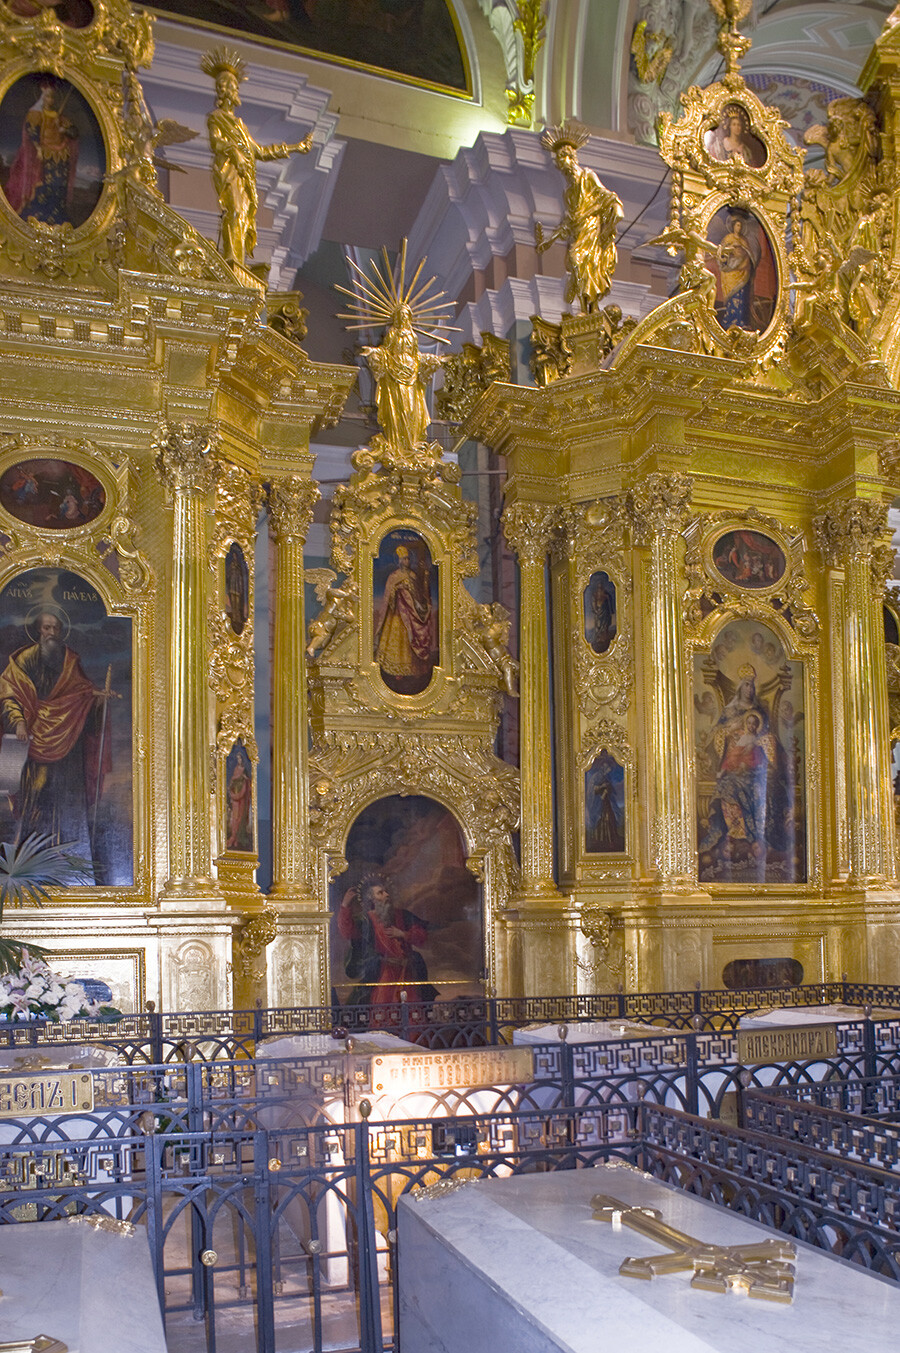 Gilded icon screen, left side with large icons of St. Paul (far left) & Mary enthroned with Christ Child. Foreground: royal sarcophagi (from left): Paul I, his wife Maria Feodorovna, Alexander I, his wife Elizabeth Alekseevna; near foreground: Nicholas I, his wife Alexandra Feodorovna.  June 7, 2015